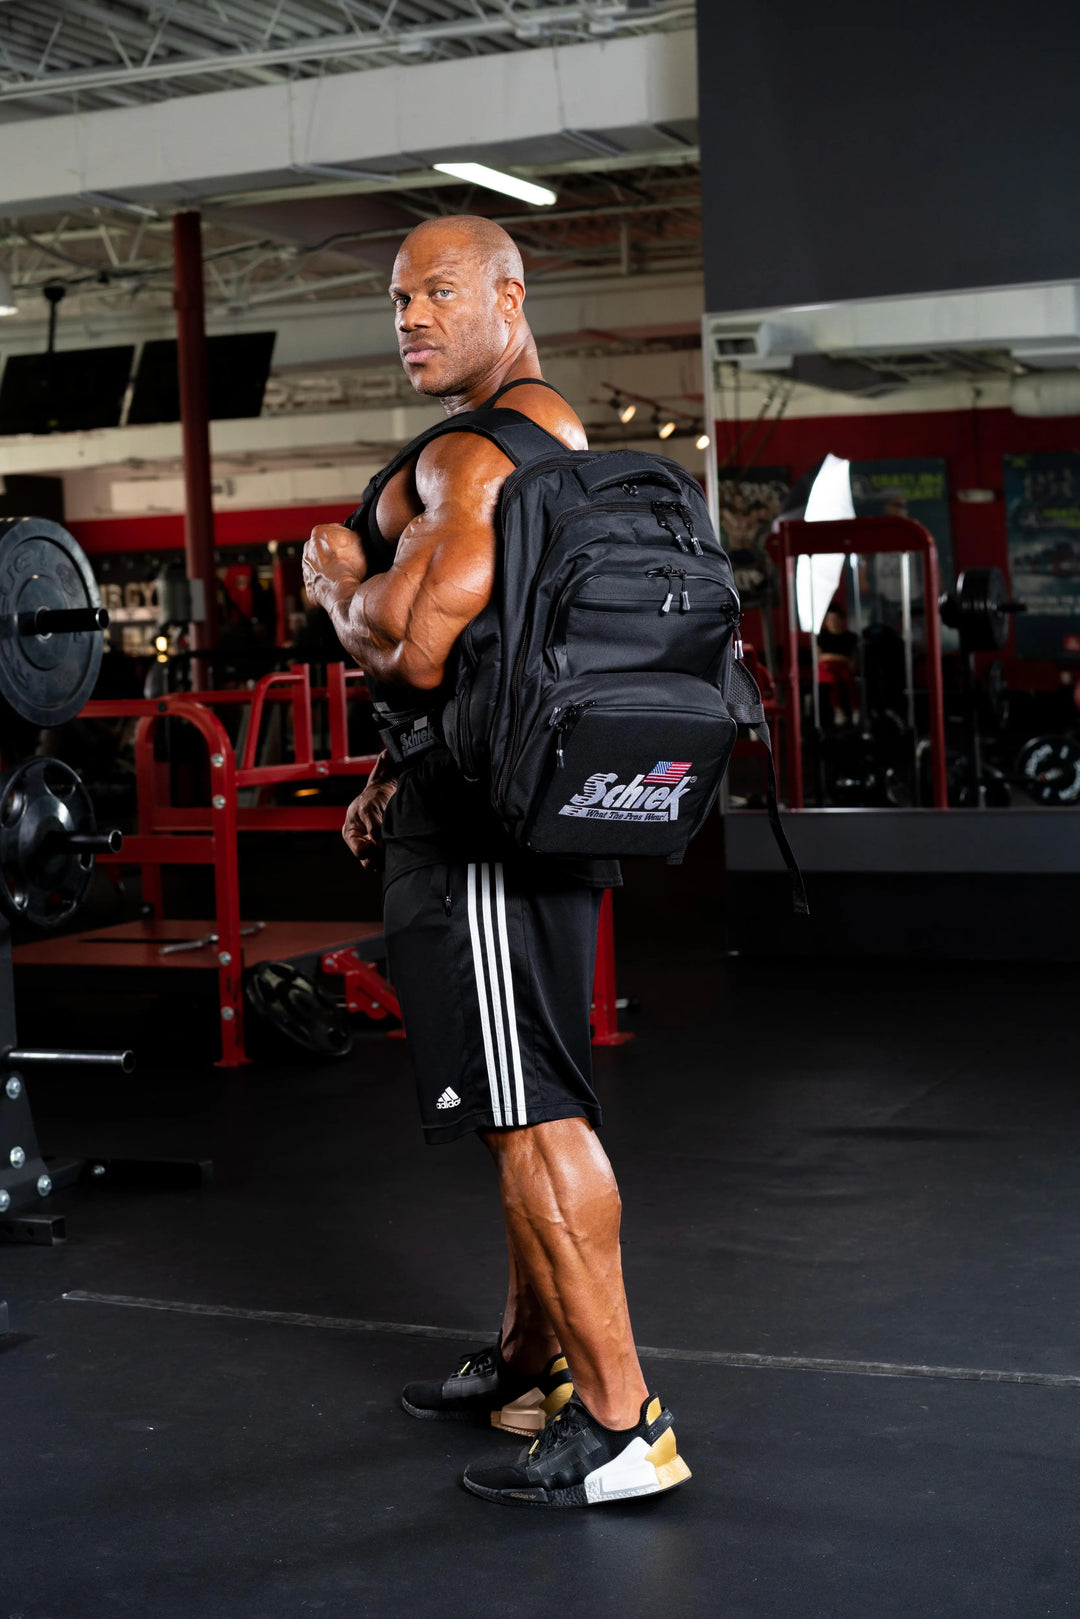 Model 700MP- Meal Pack Gym Backpack Schiek Sports